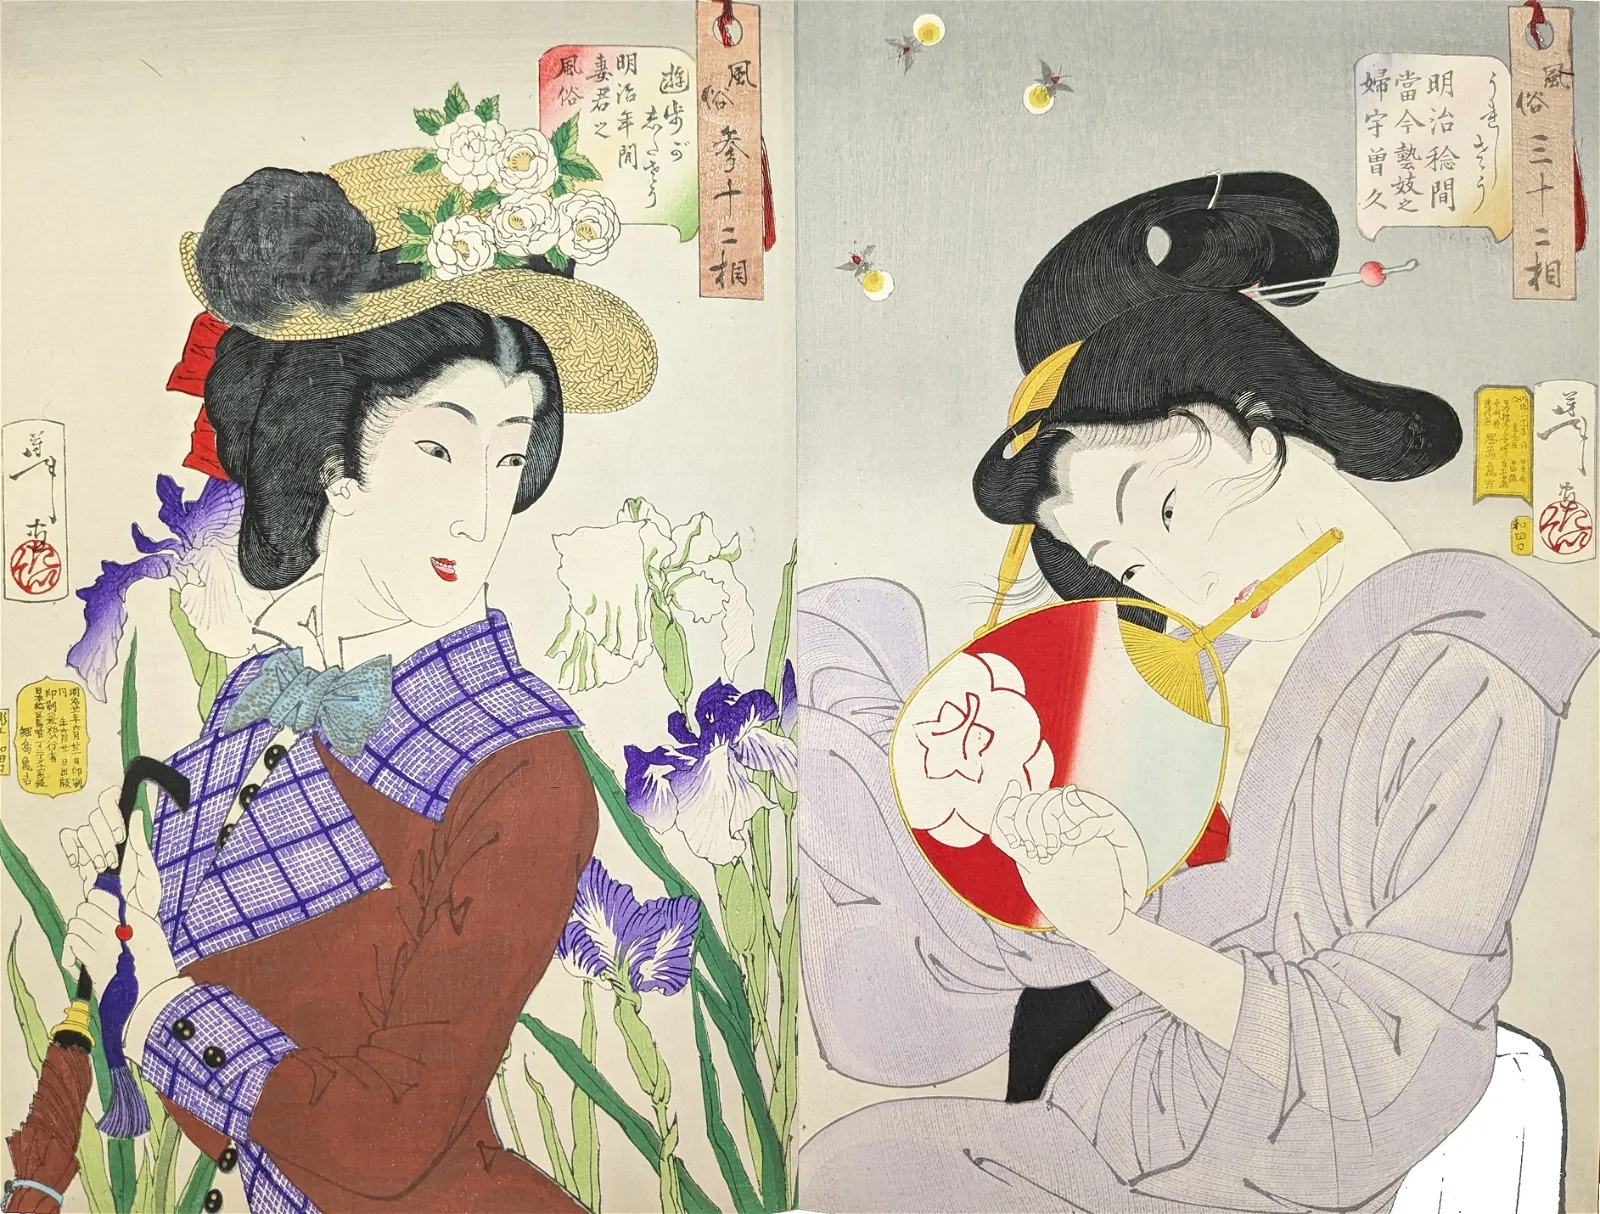 Tsukioka Yoshitoshi, 'Thirty-two Aspects of Customs & Manners (Fuzoku sanjuniso),' which sold for $13,000 ($16,510 with buyer's premium) at Tremont.